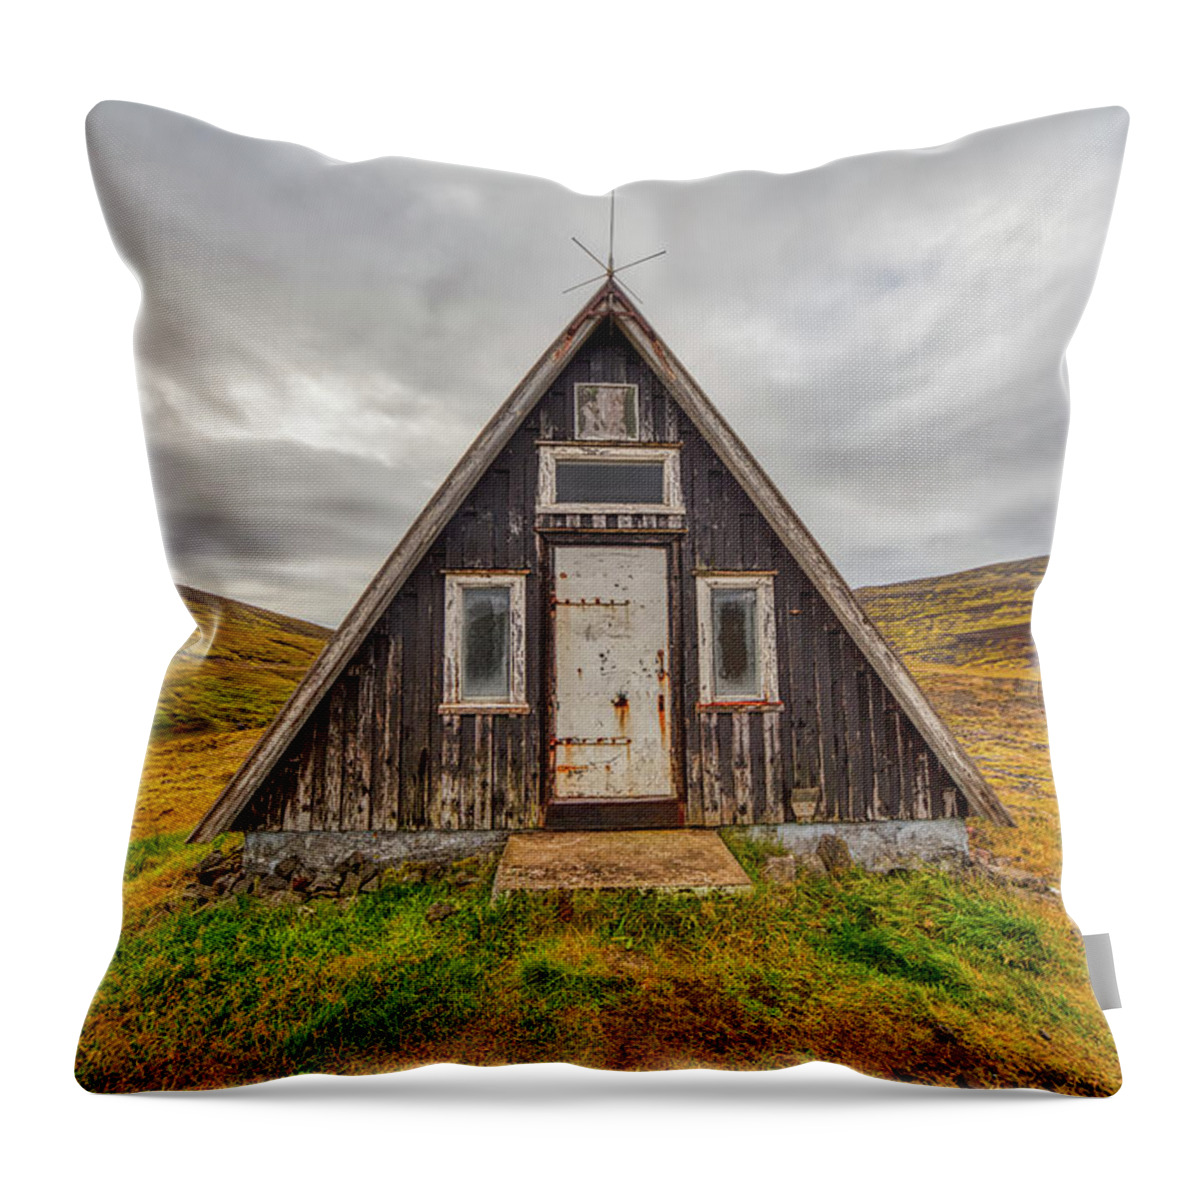 David Letts Throw Pillow featuring the photograph Iceland Chalet by David Letts